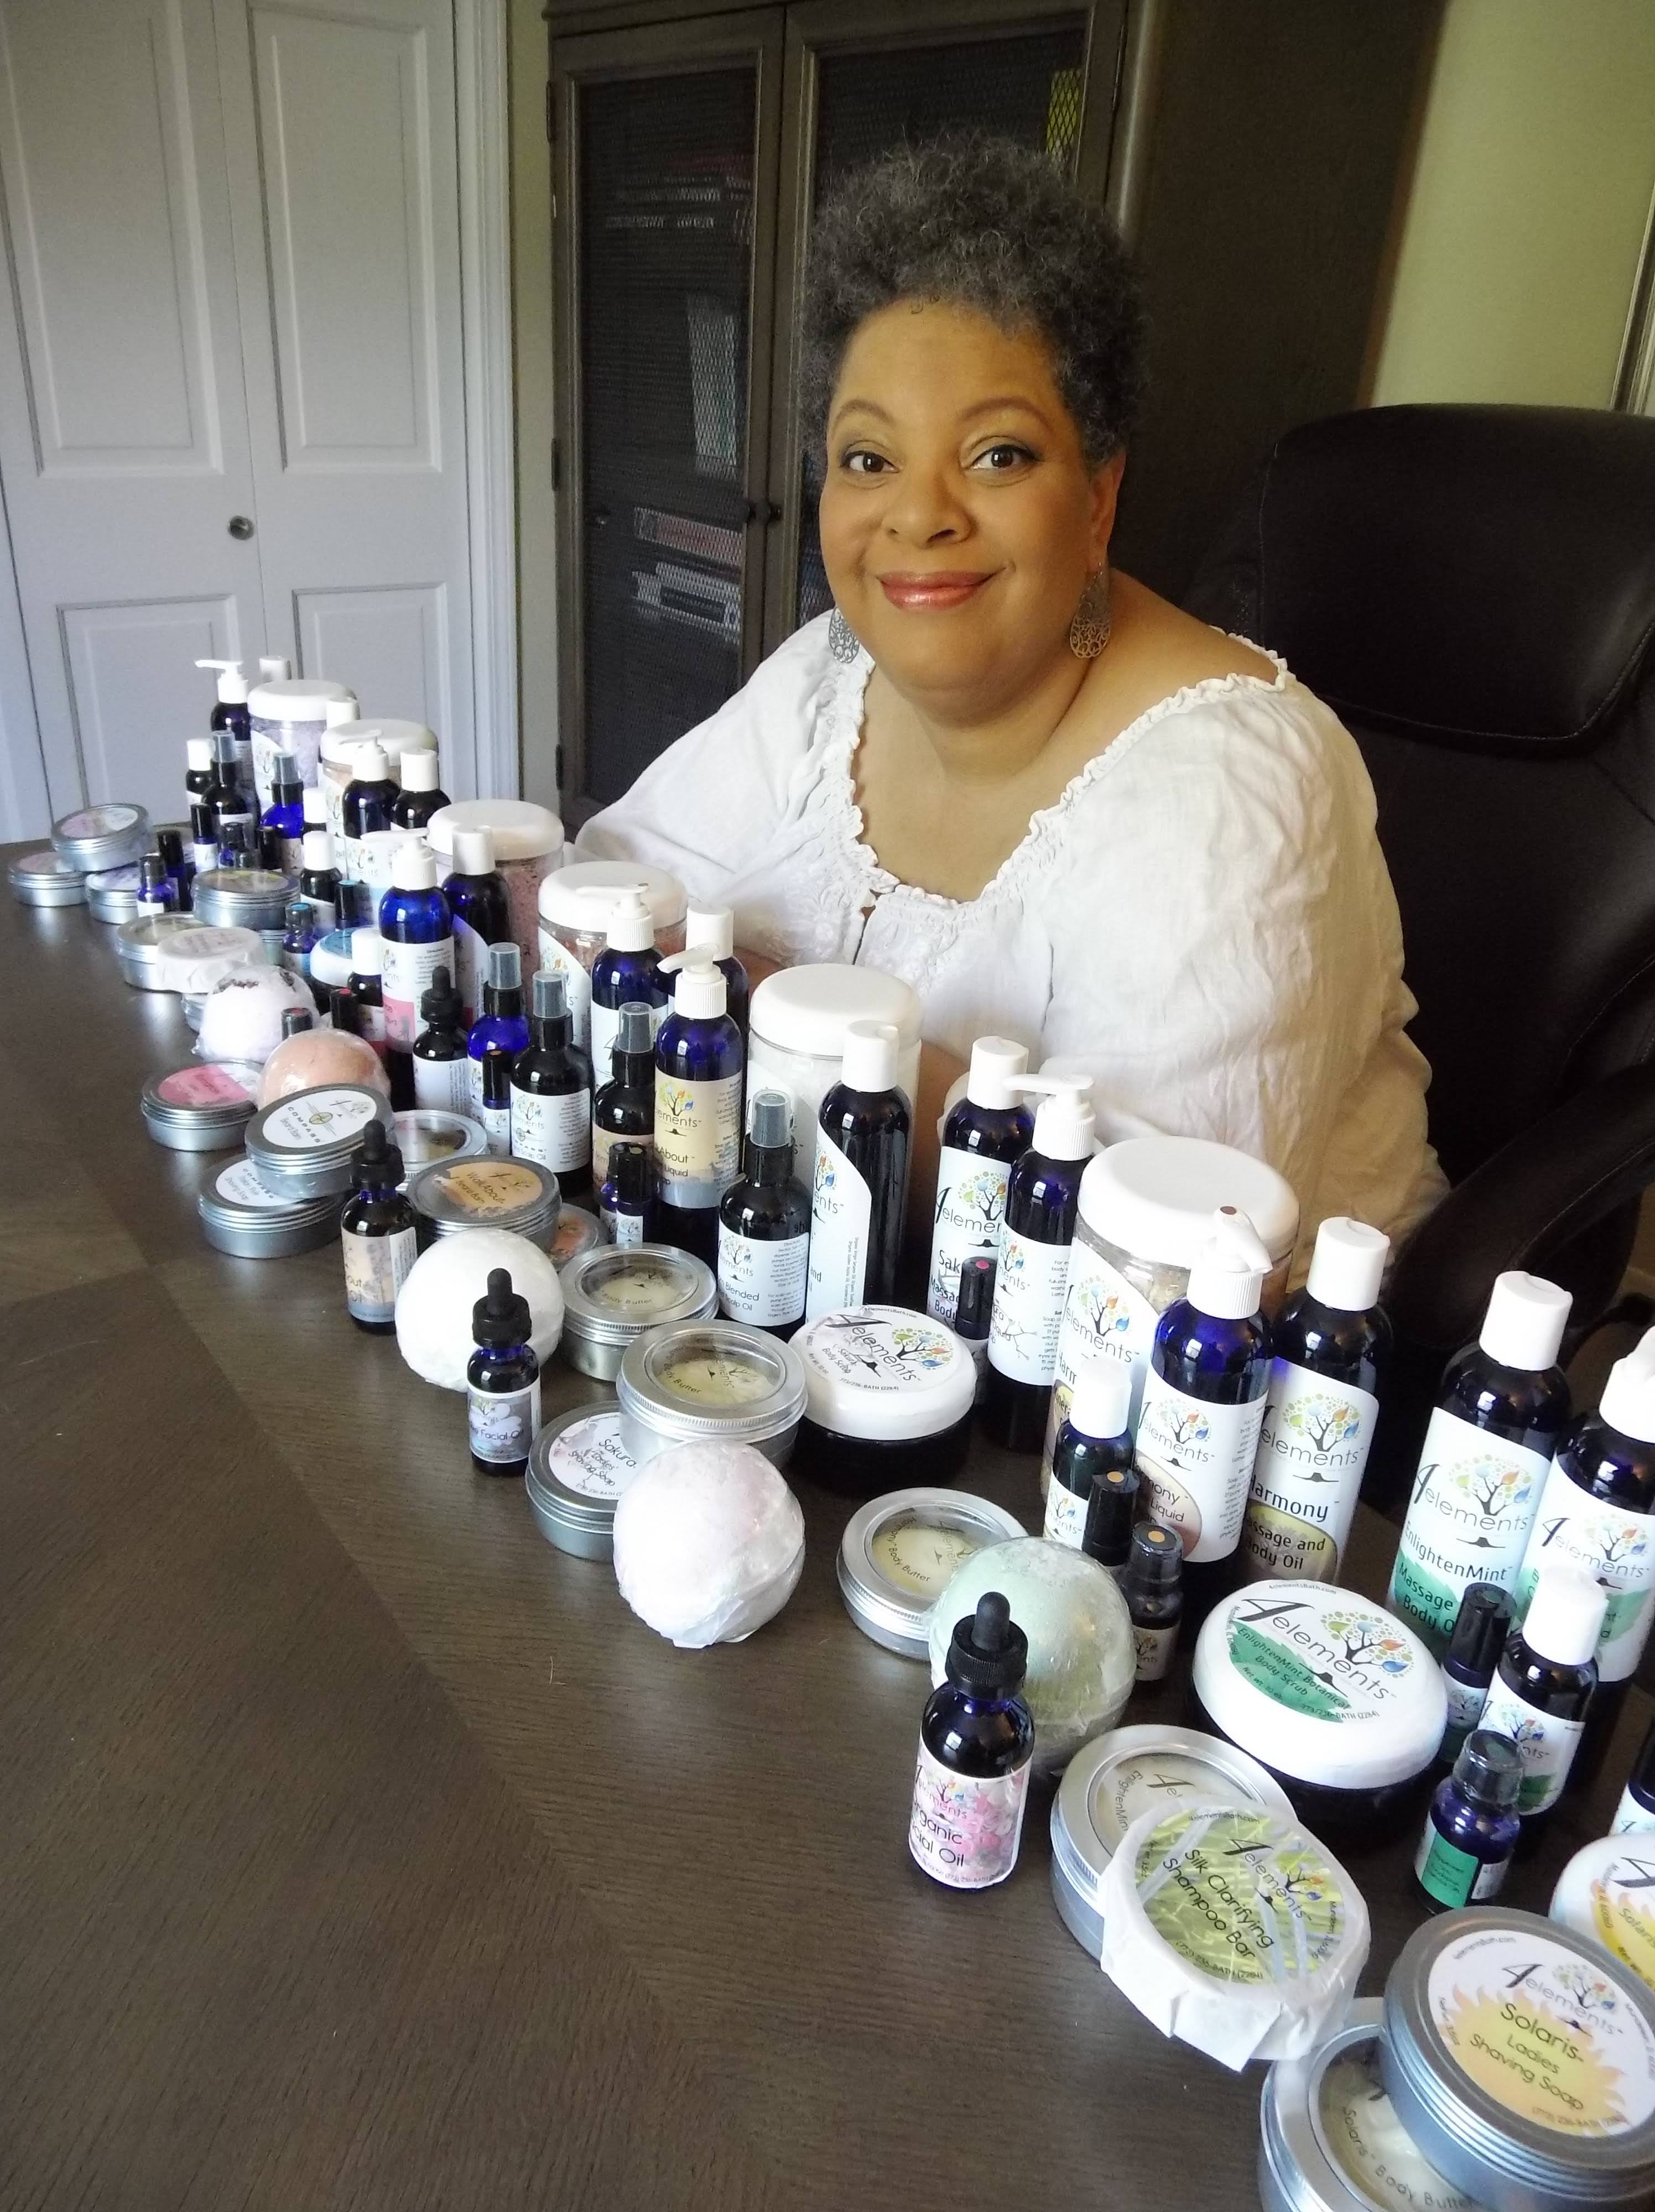 4Elements Bath Founder Charise Cowan-Leroy smiling behind a spread of skincare products such as lotions, body butters, and castile soaps.